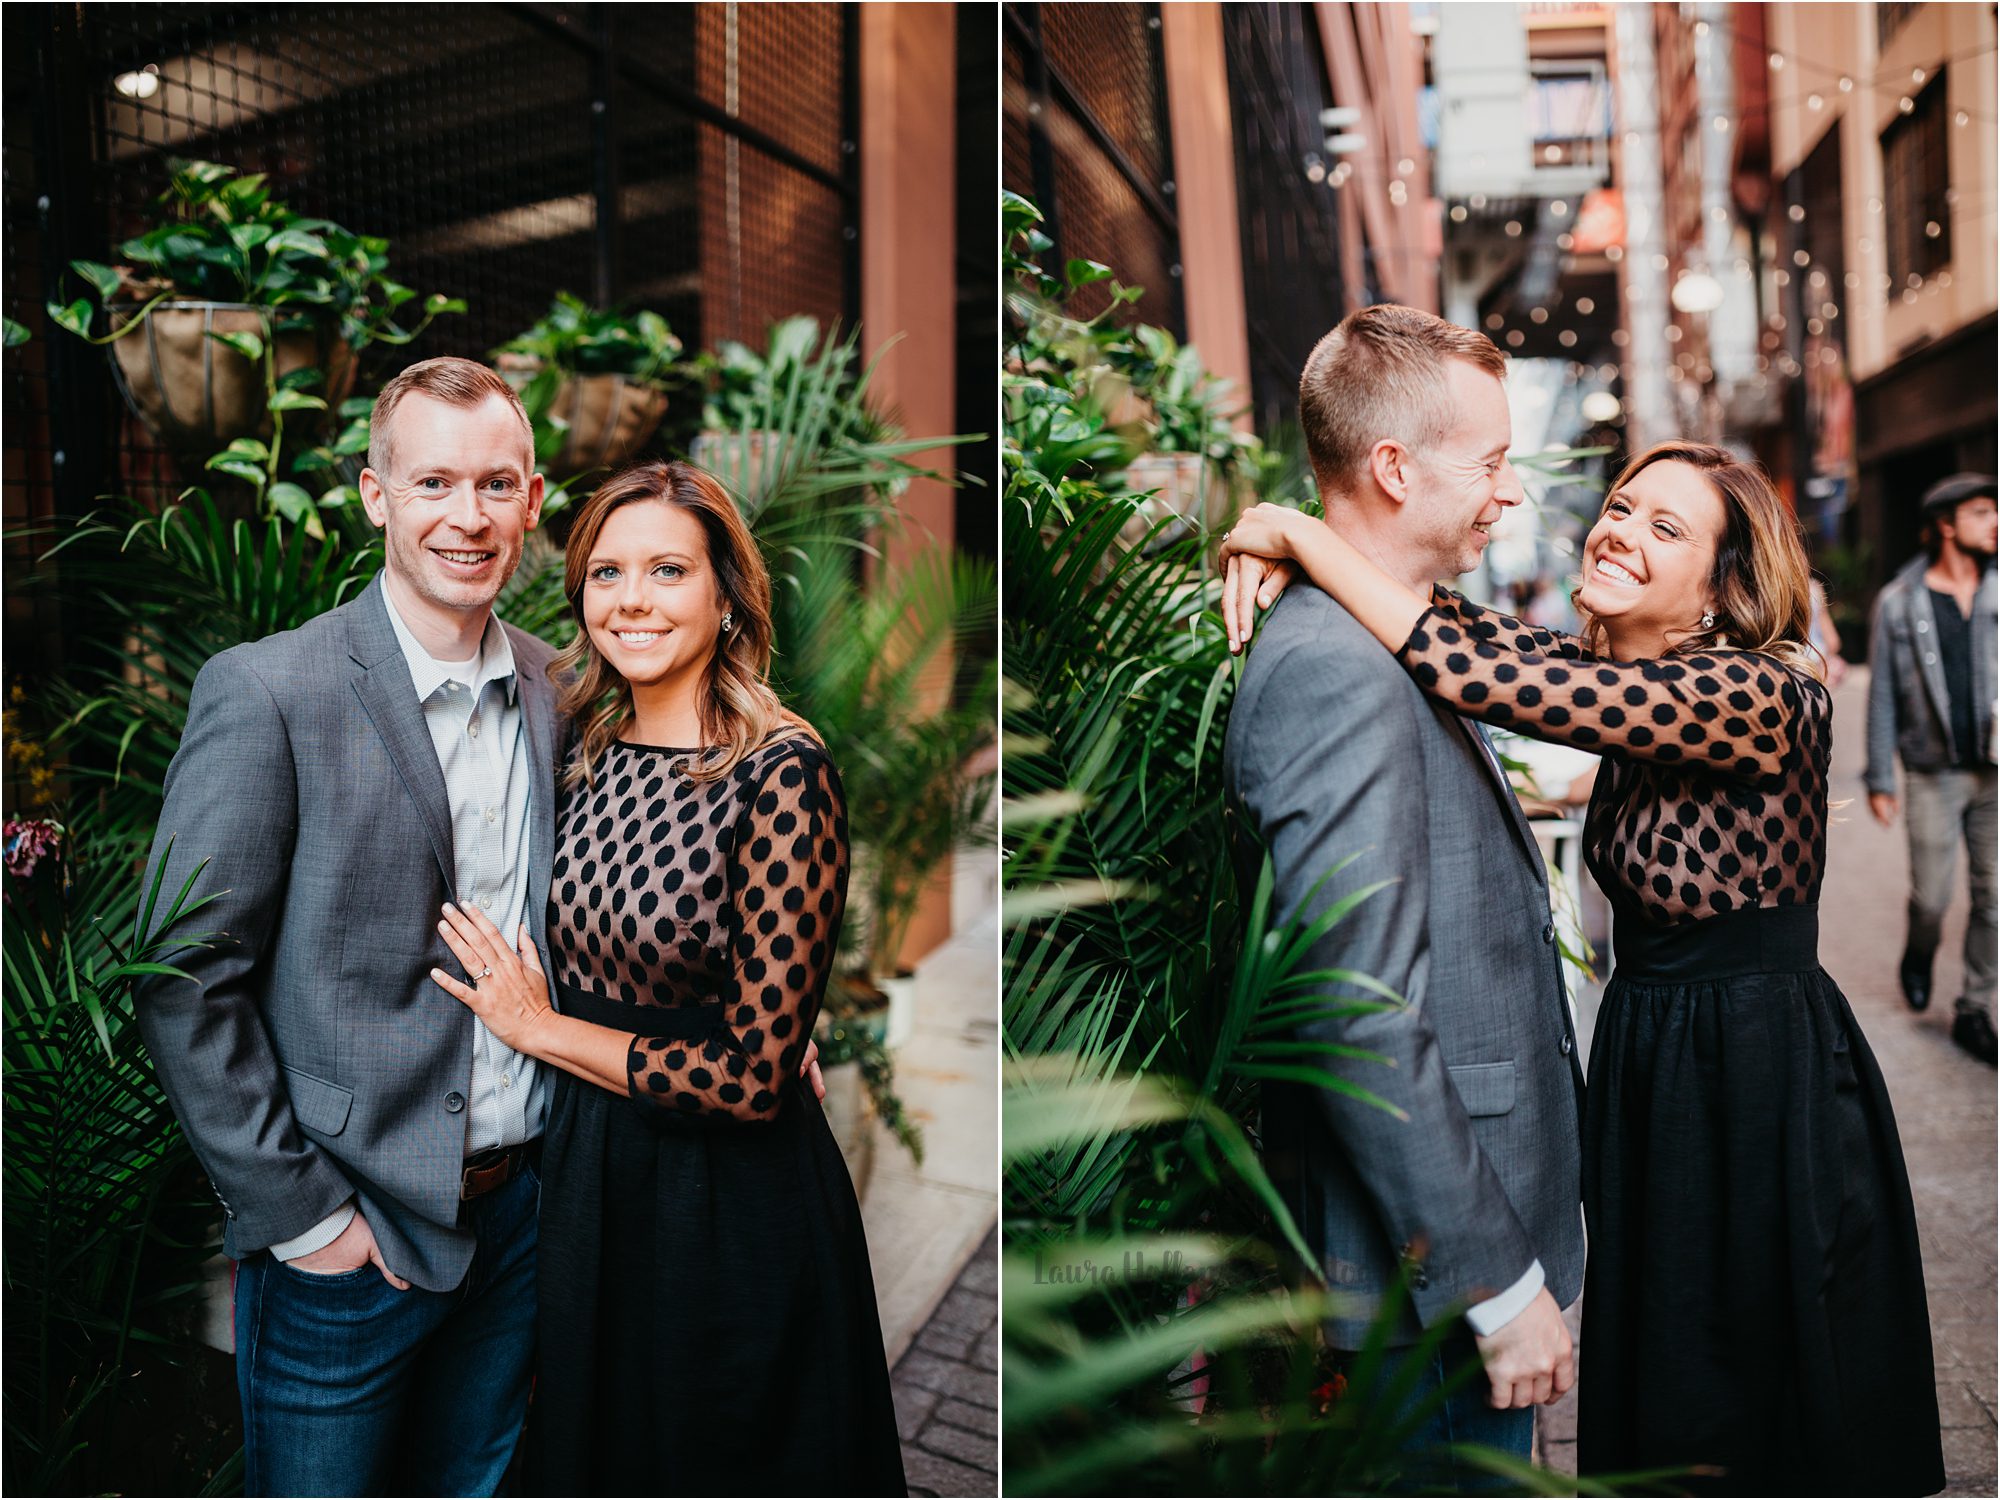 engagement session at The Belt in Downtown Detroit, MI. Urban engagement photos with Laura Hollander Photography